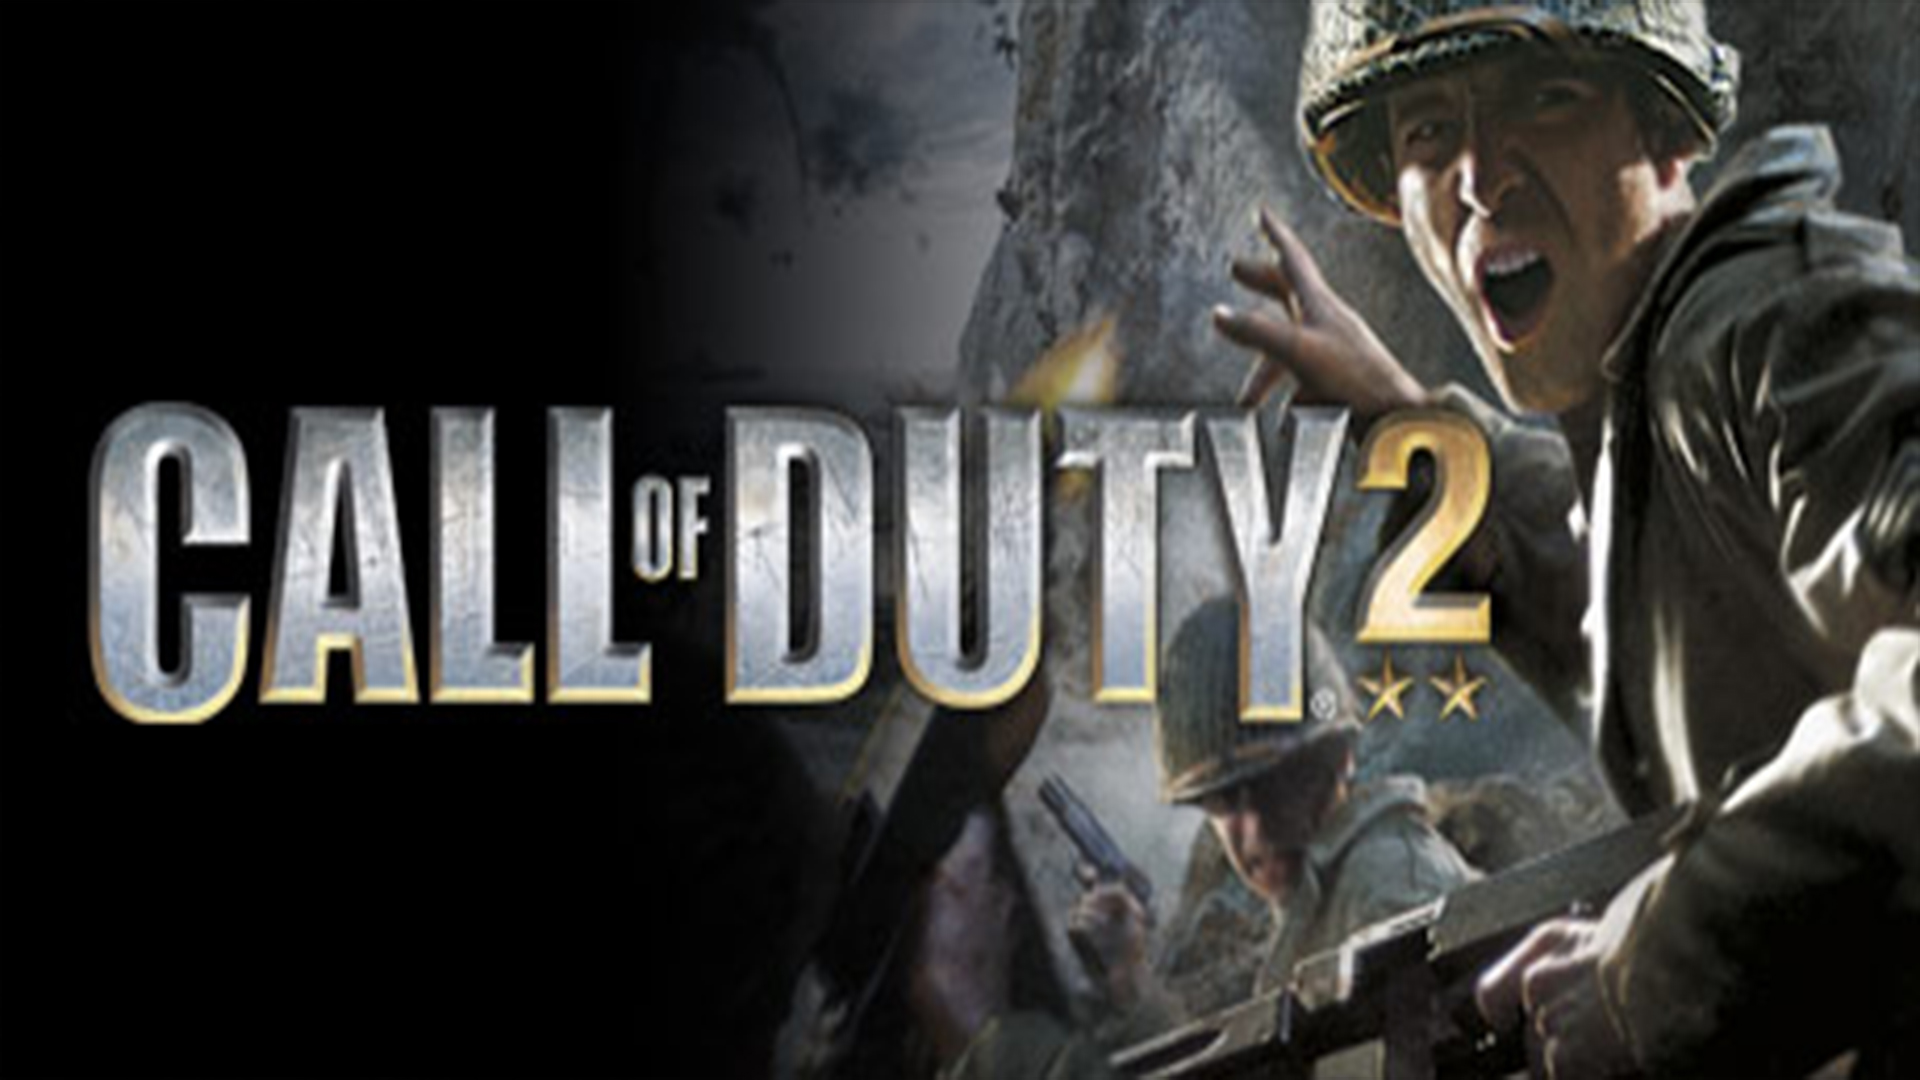 Call Of Duty 2 HD Wallpaper Background Image 1920x1080